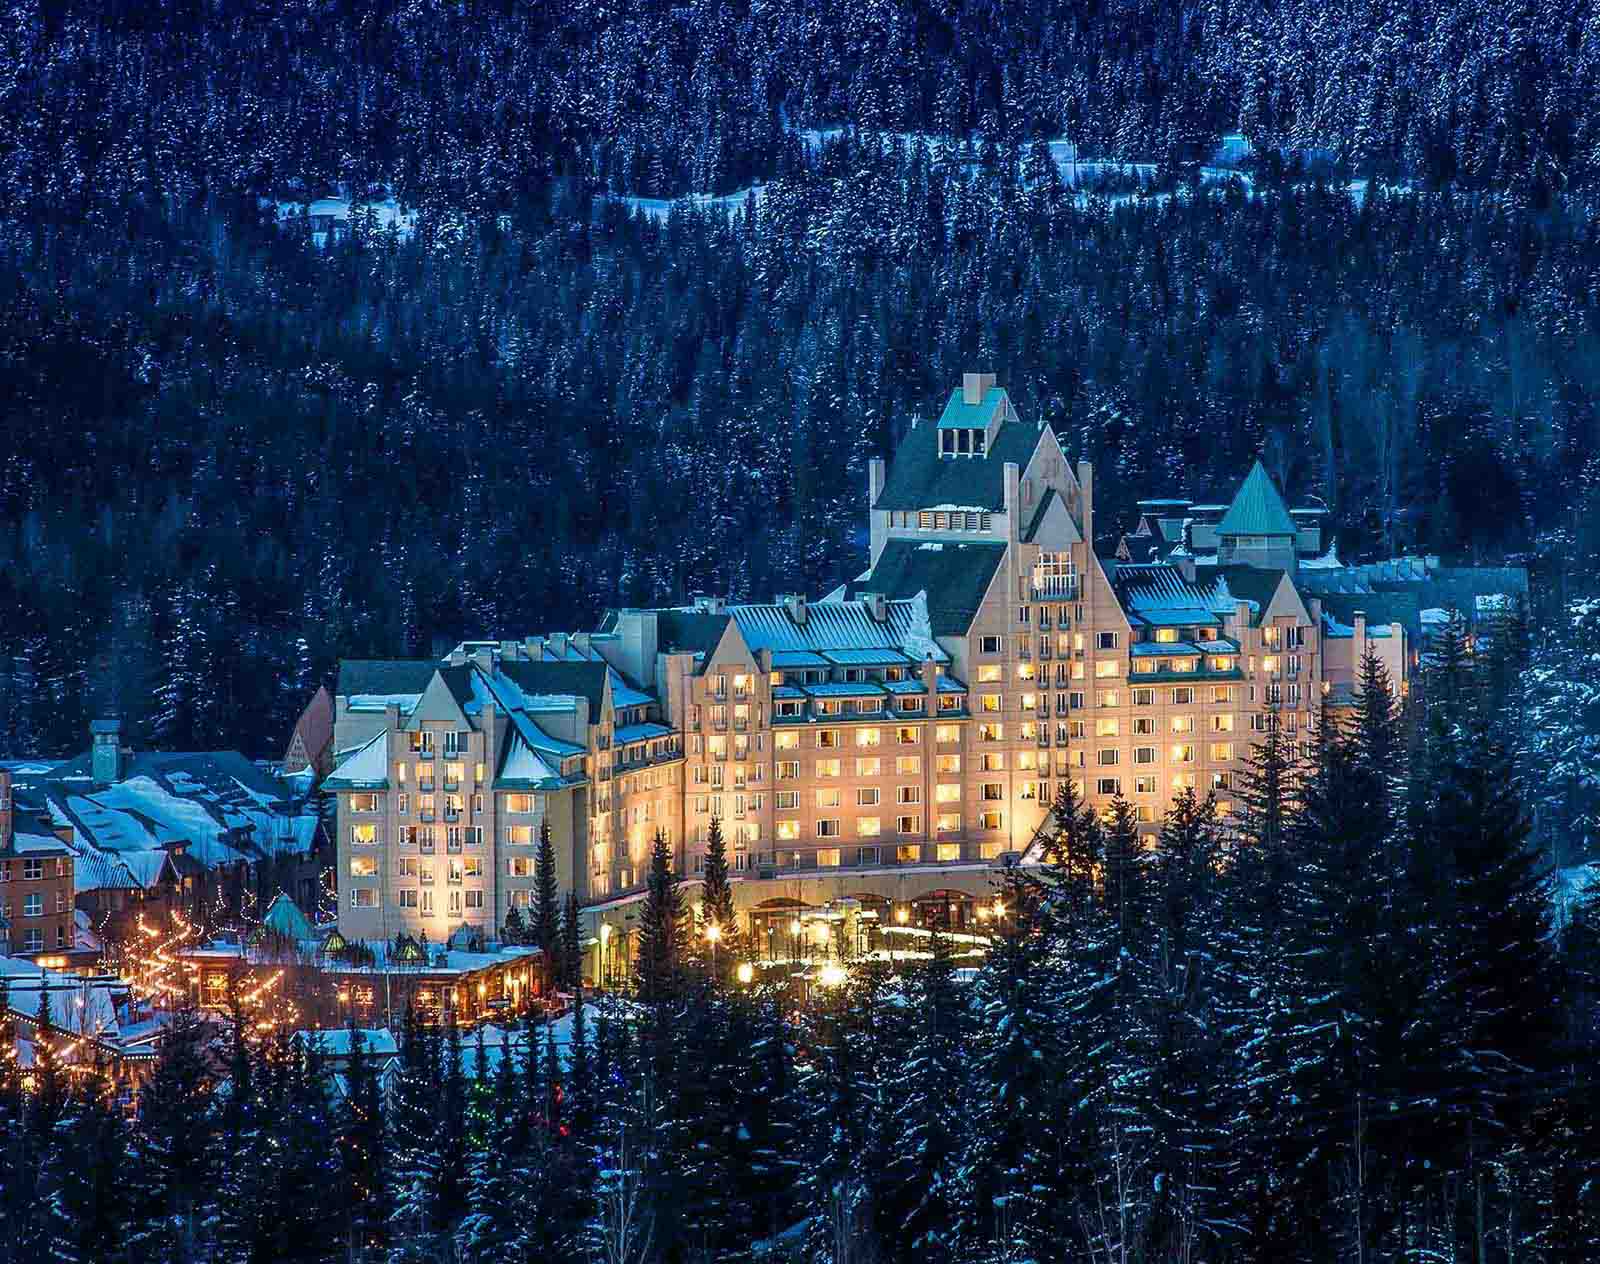 Fairmont Chateau Whistler | Canada's stately chateaux